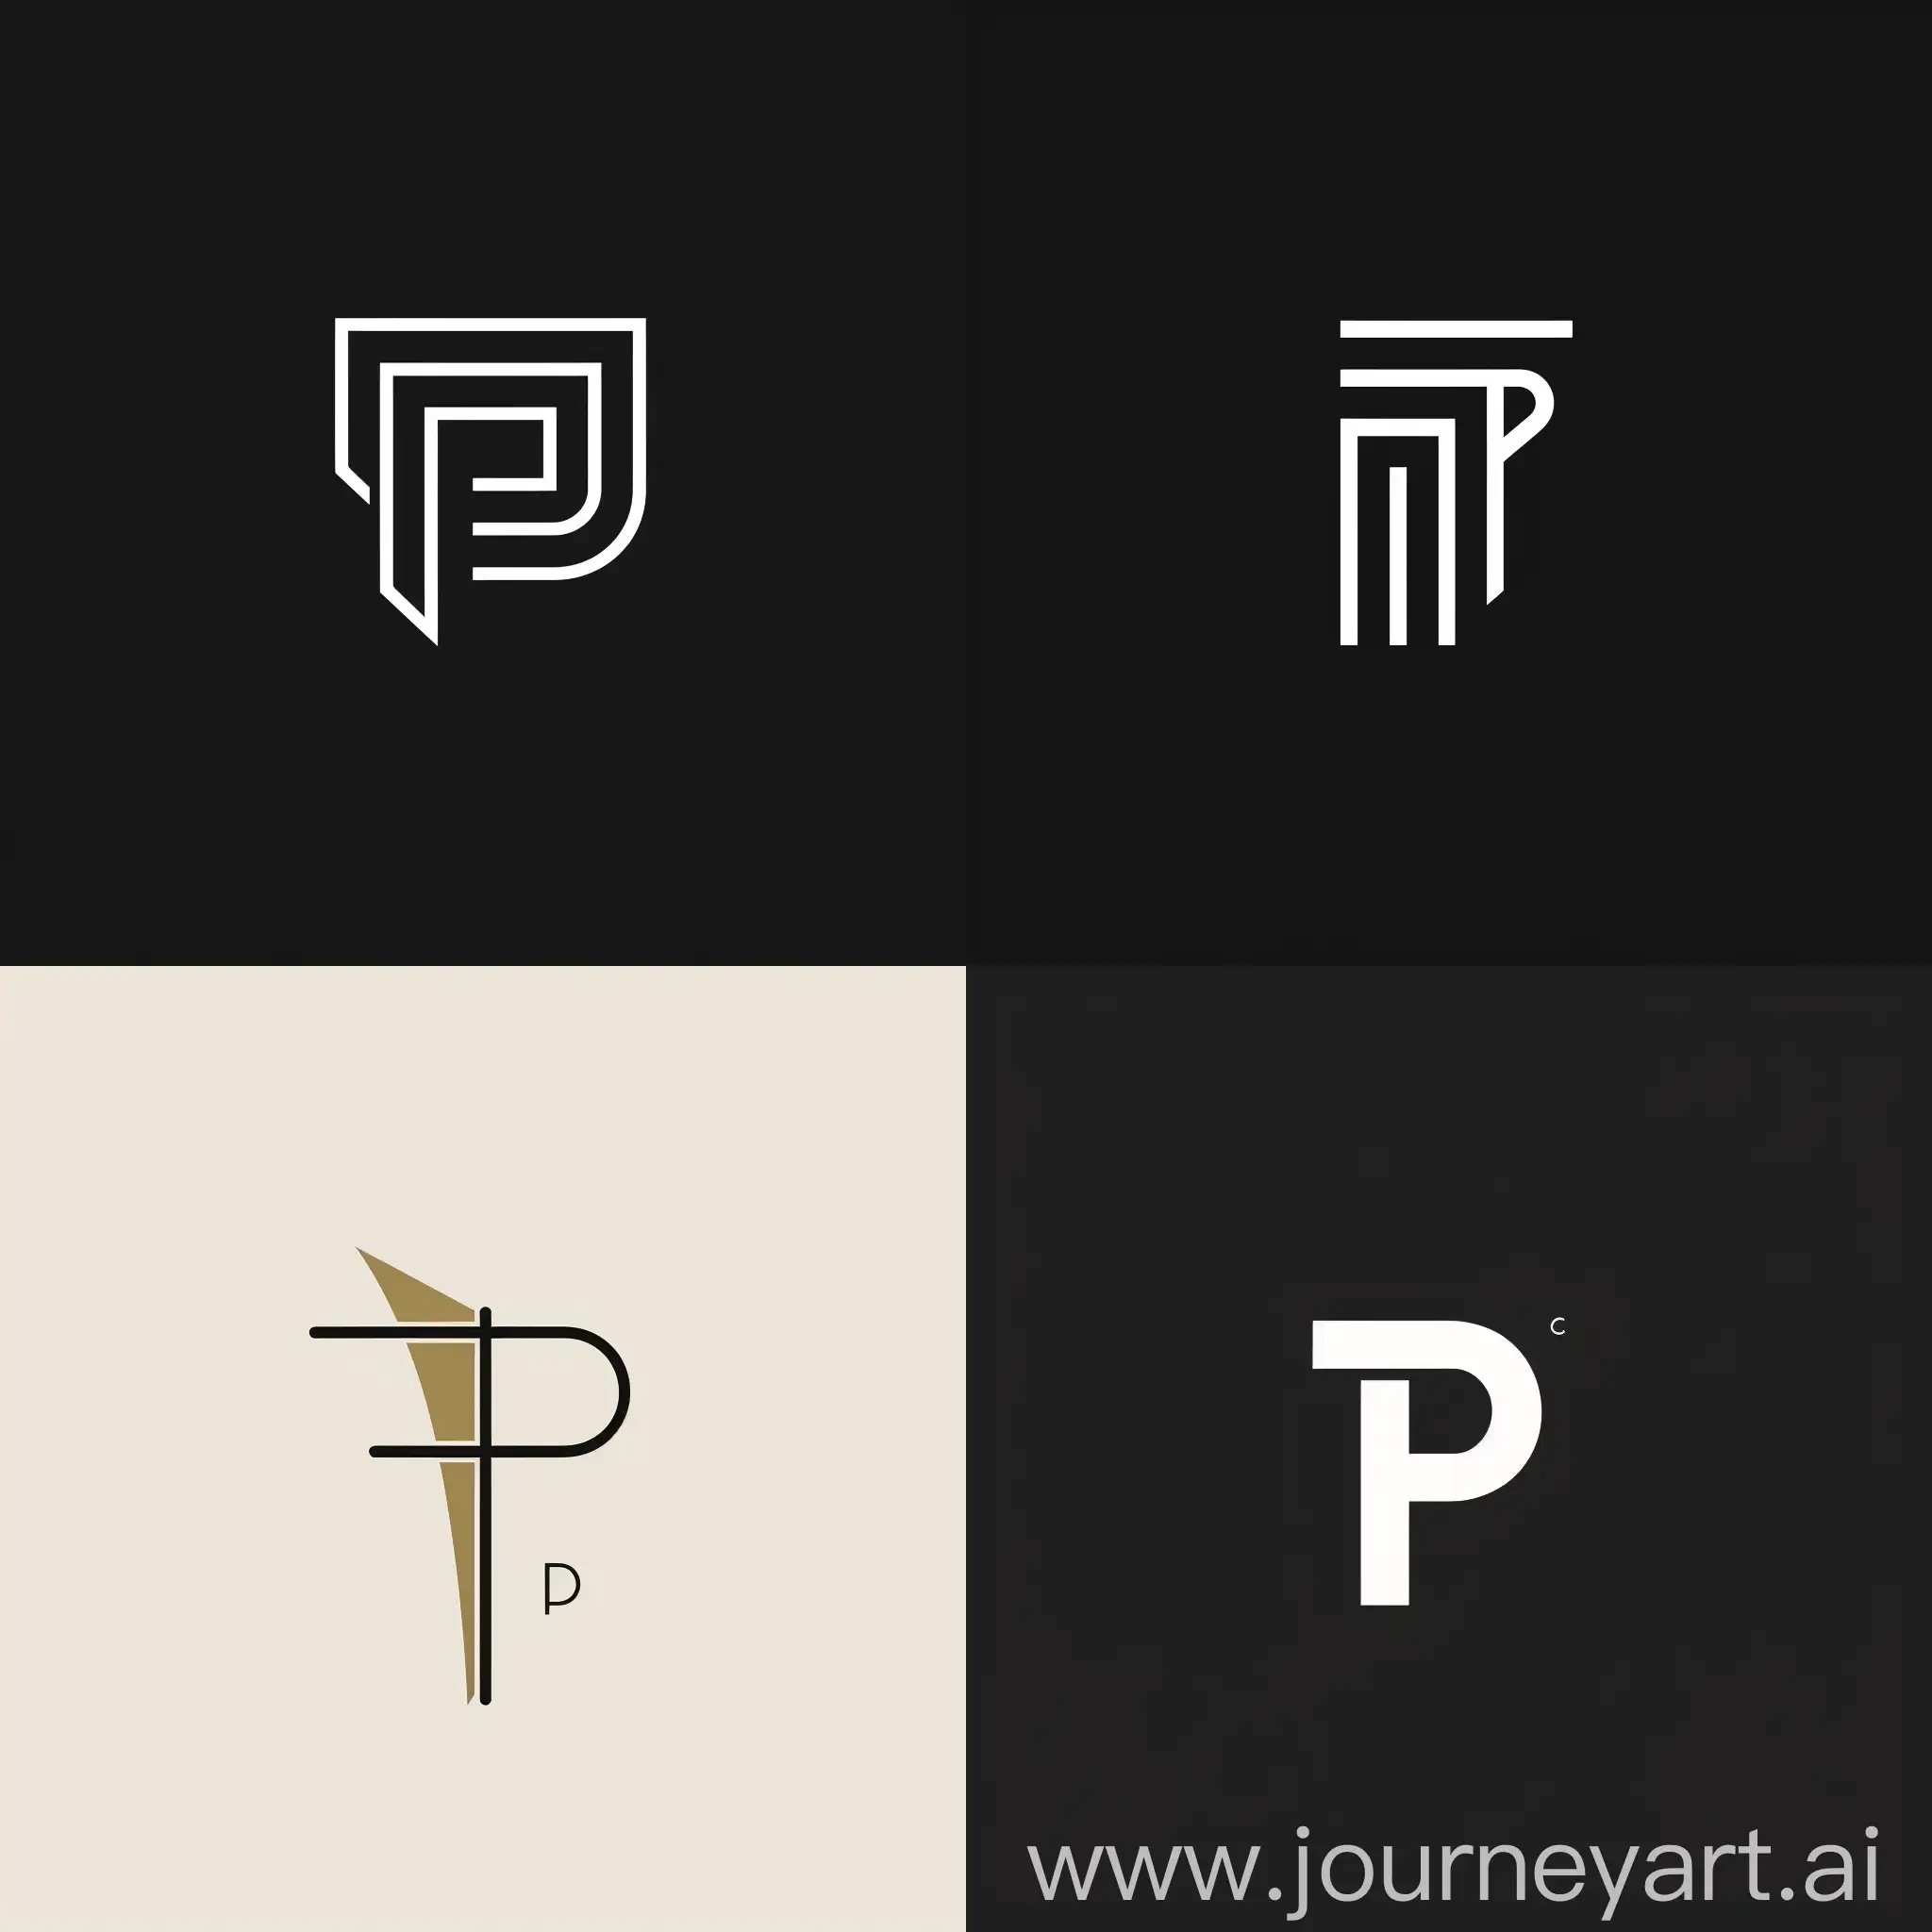 a minimalistic logo associated with a virtual passport. The logo must contain the letter P.